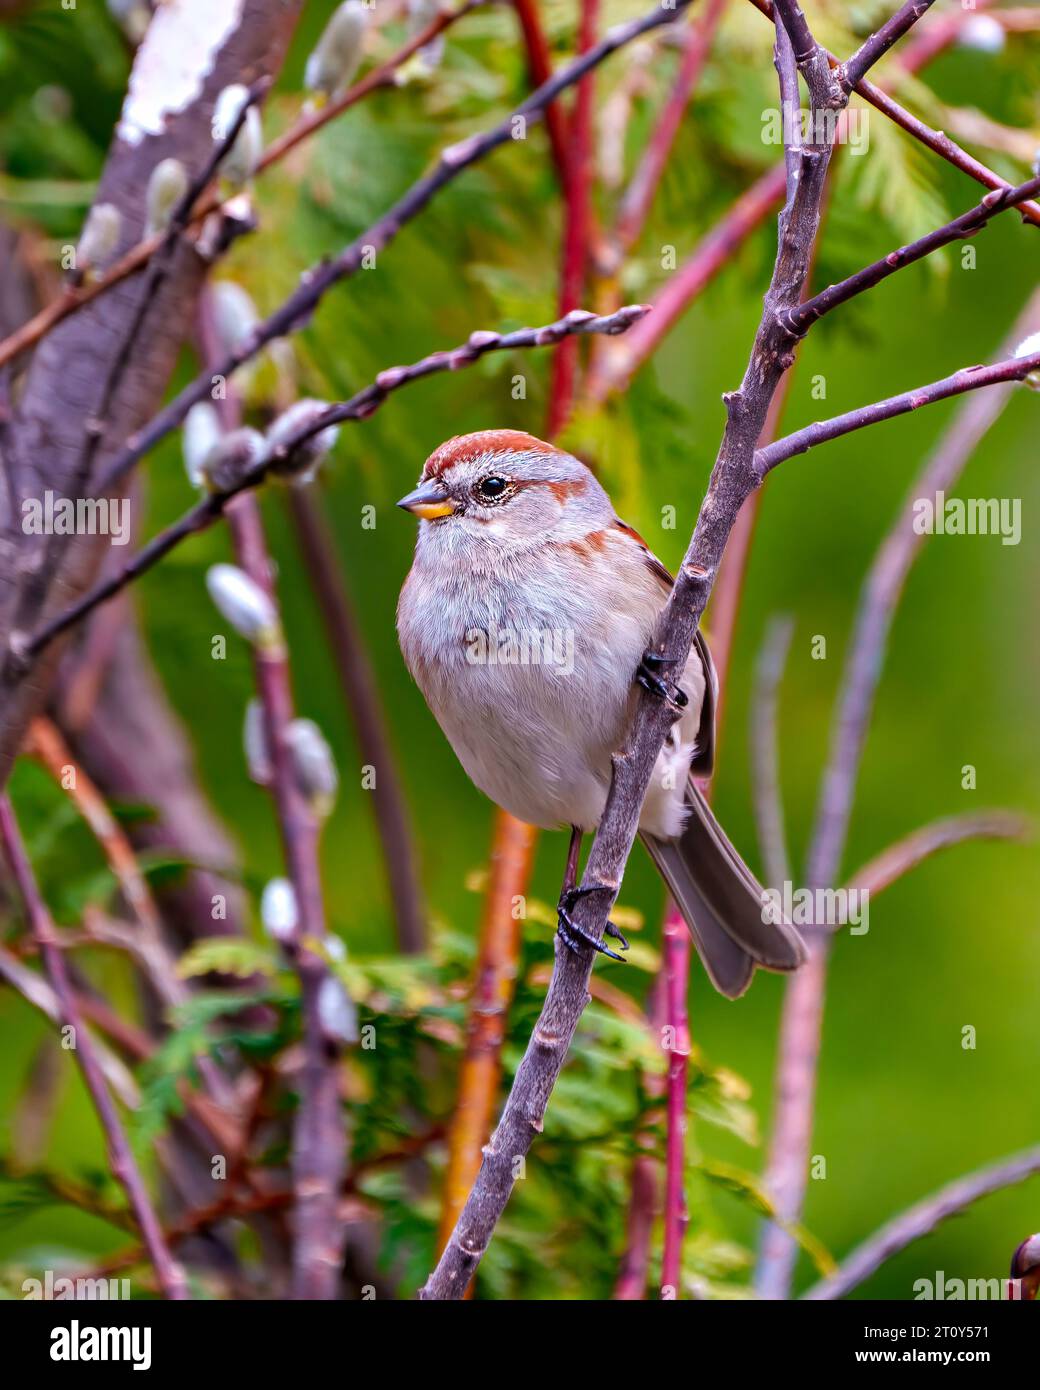 American Tree Sparrow close-up front view perched on a tree bud branch with a forest background in its environment and habitat. Sparrow Picture. Stock Photo